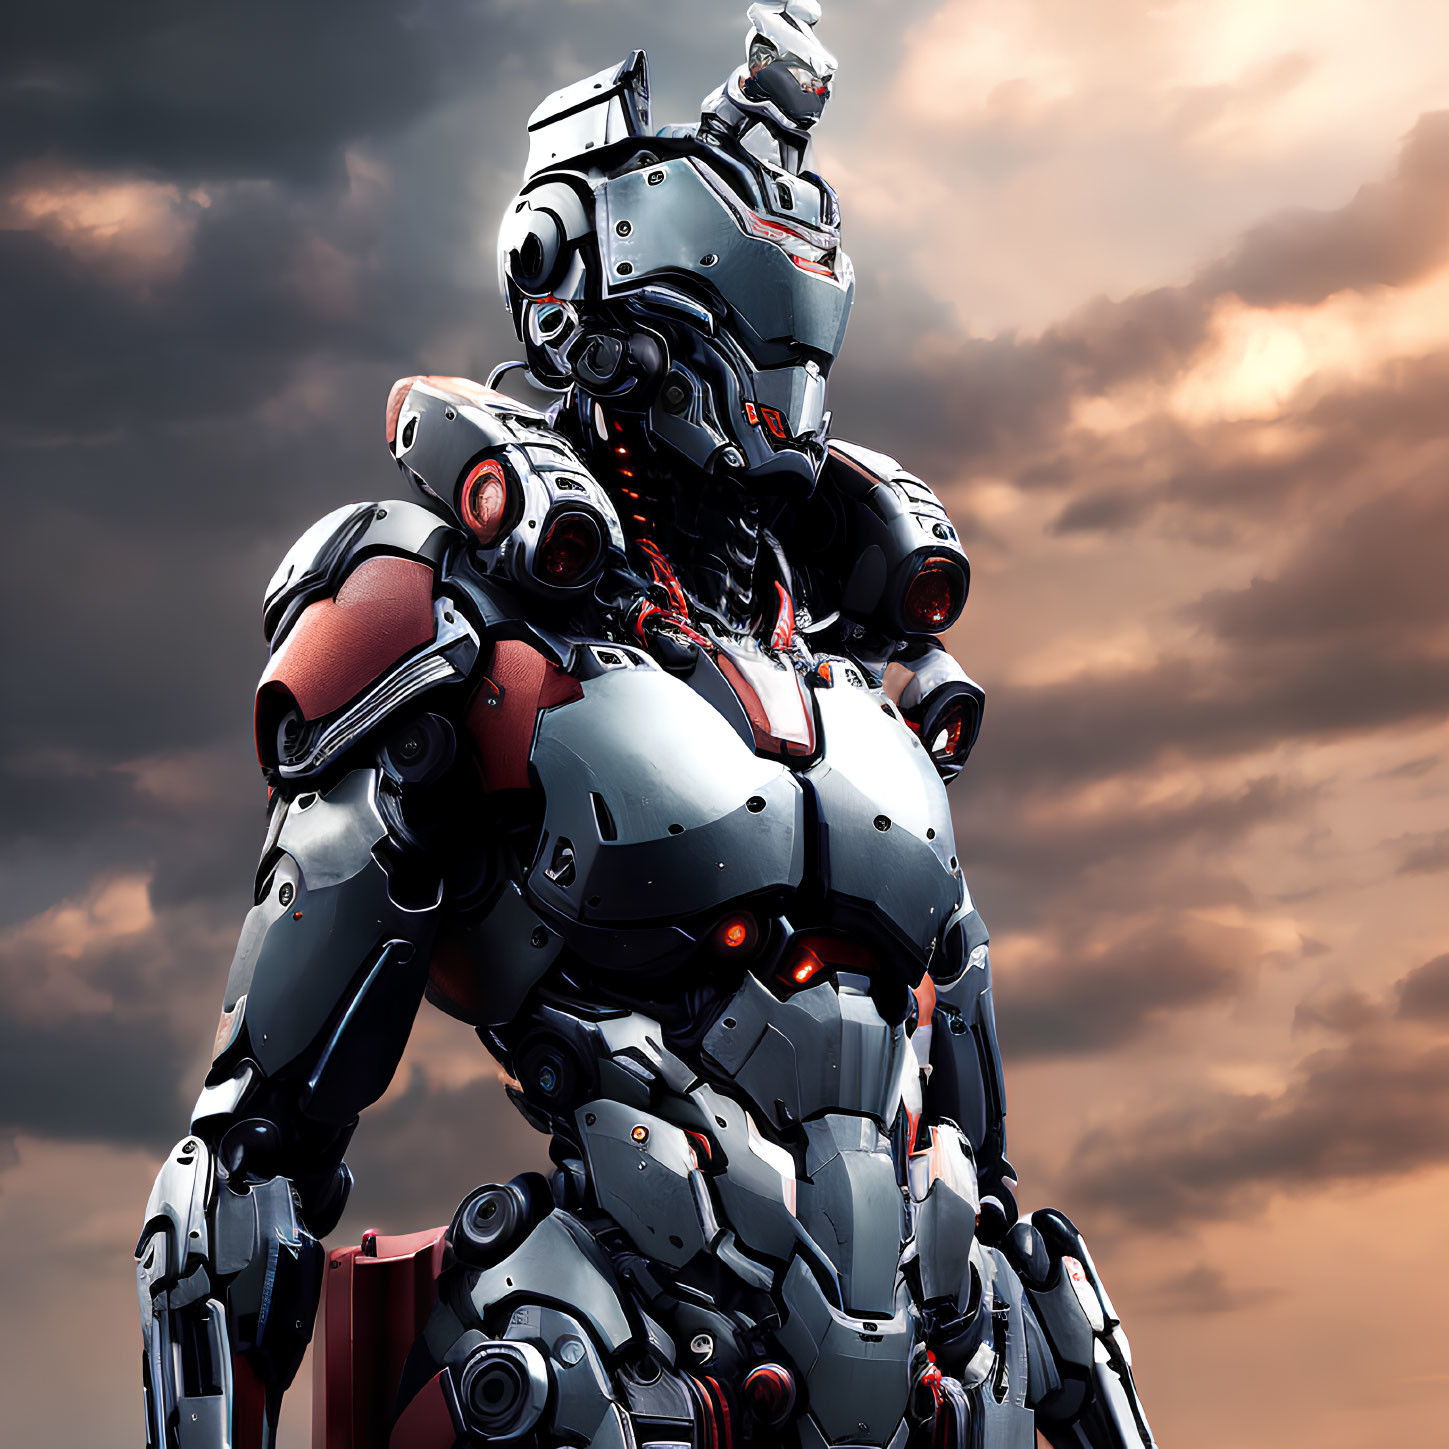 Detailed futuristic humanoid robot with metallic armor and red accents in dramatic sky.